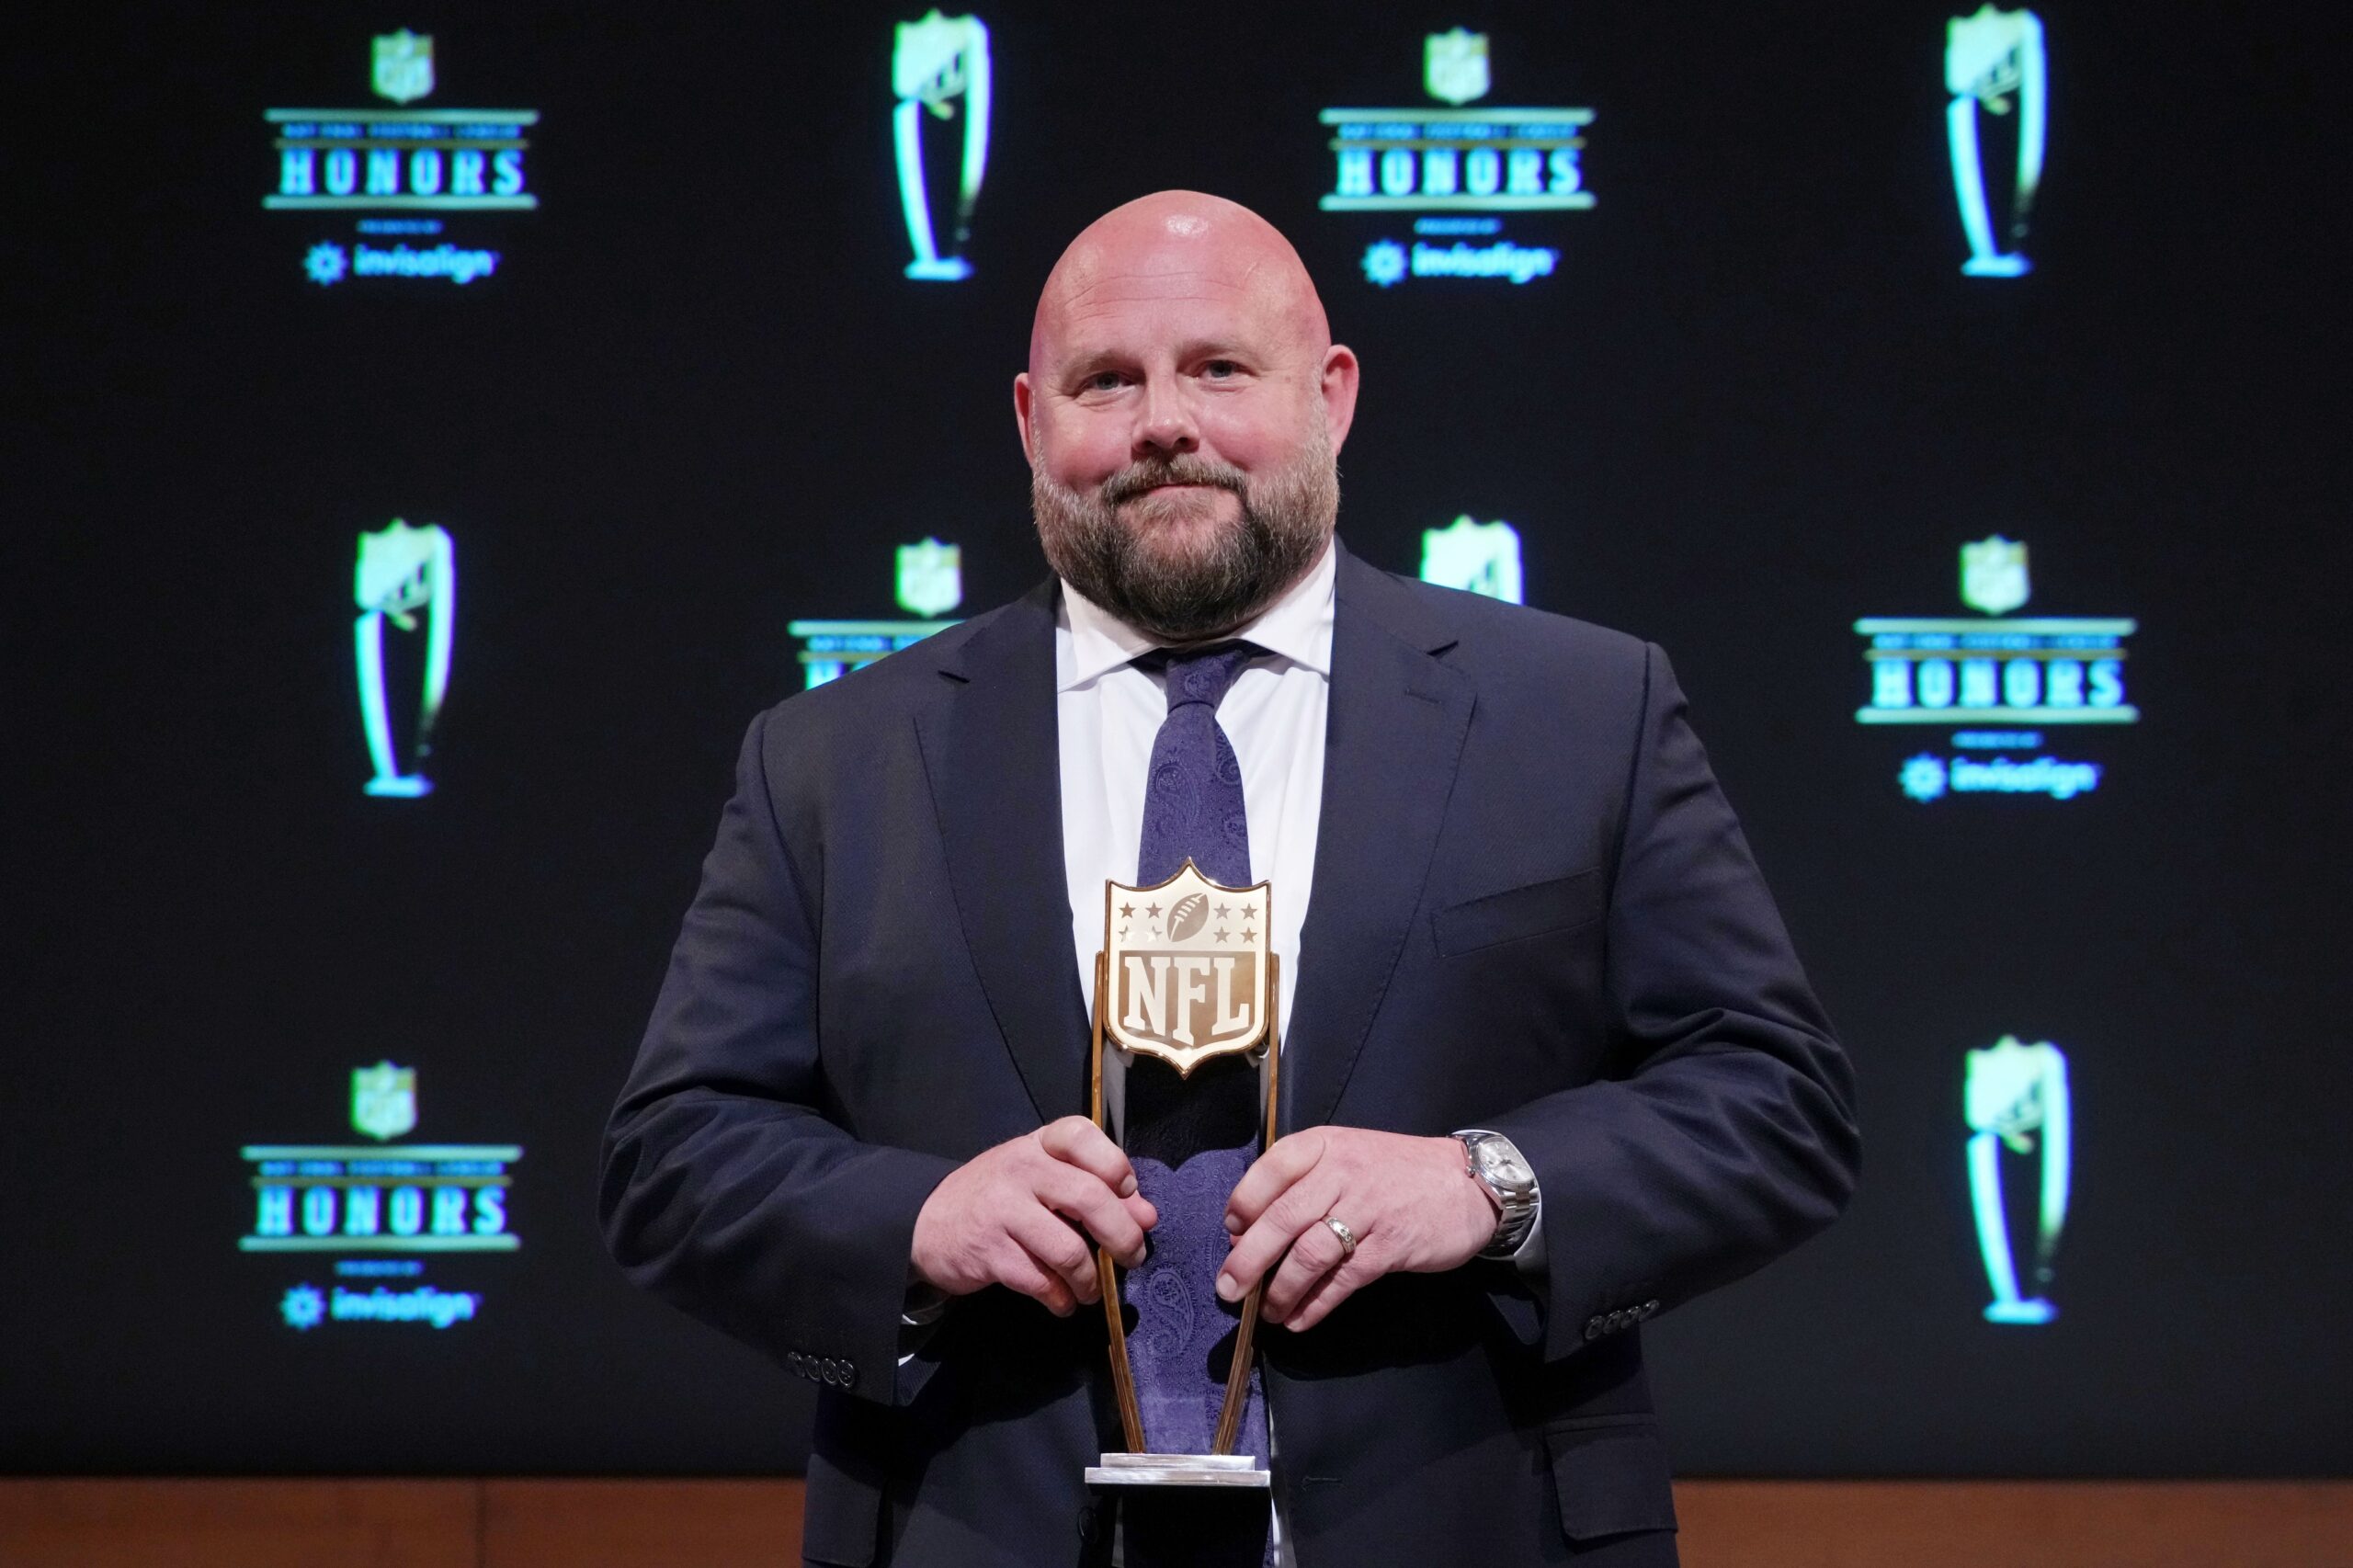 Brian Daboll poses for a photo after receiving the award for AP Coach of the Year during the NFL Honors award show at Symphony Hall.